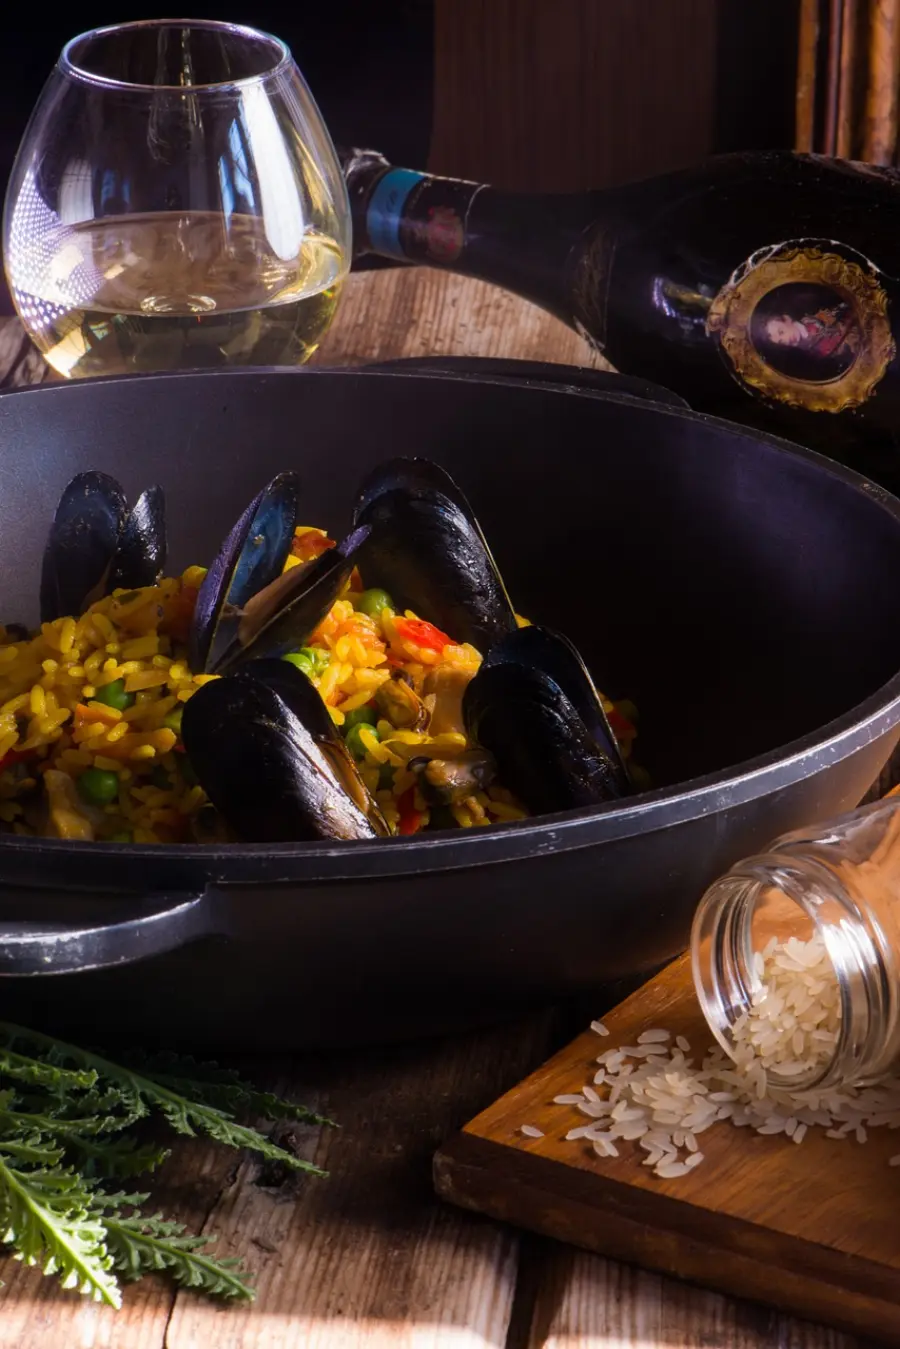 A sumptuous dish of mussels served over seasoned rice in a black pan, accompanied by a glass of white wine and a bottle in the dim ambiance, invoking a cozy dining atmosphere